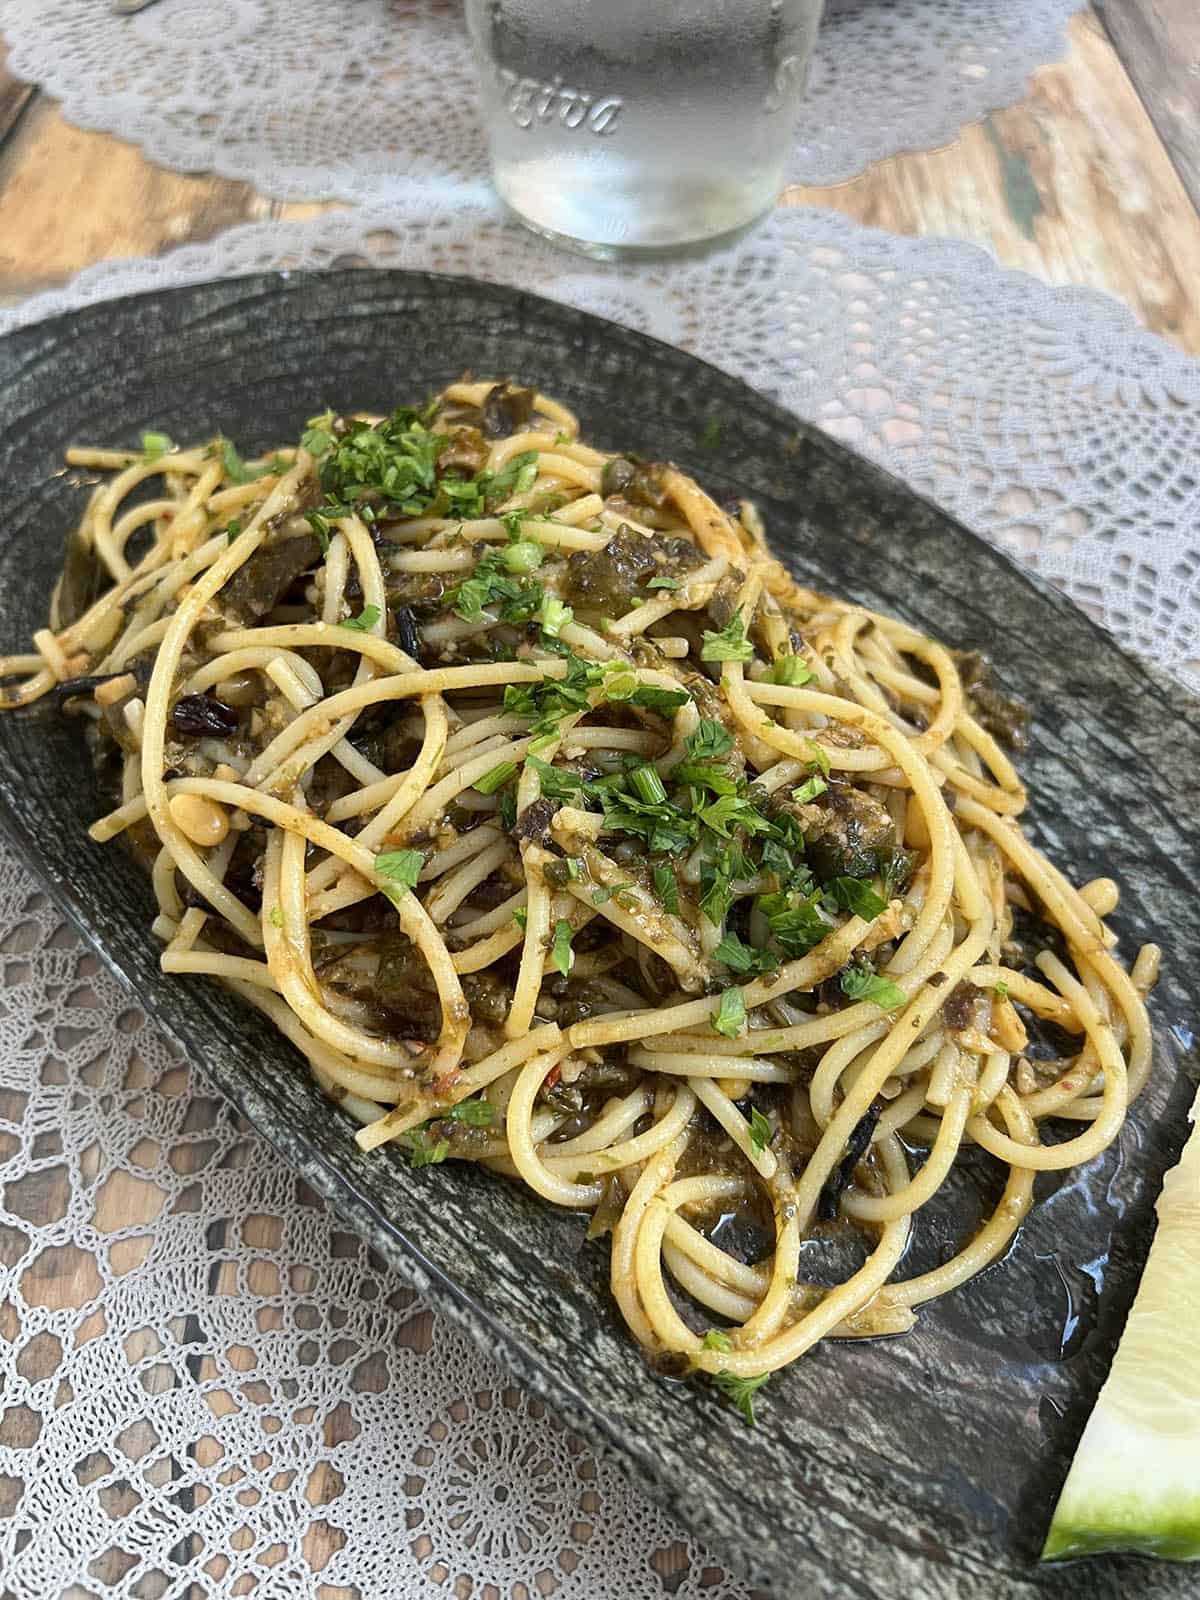 An image of a plate of gluten free vegan pasta con le sarde from MOON restaurant in Ortigia